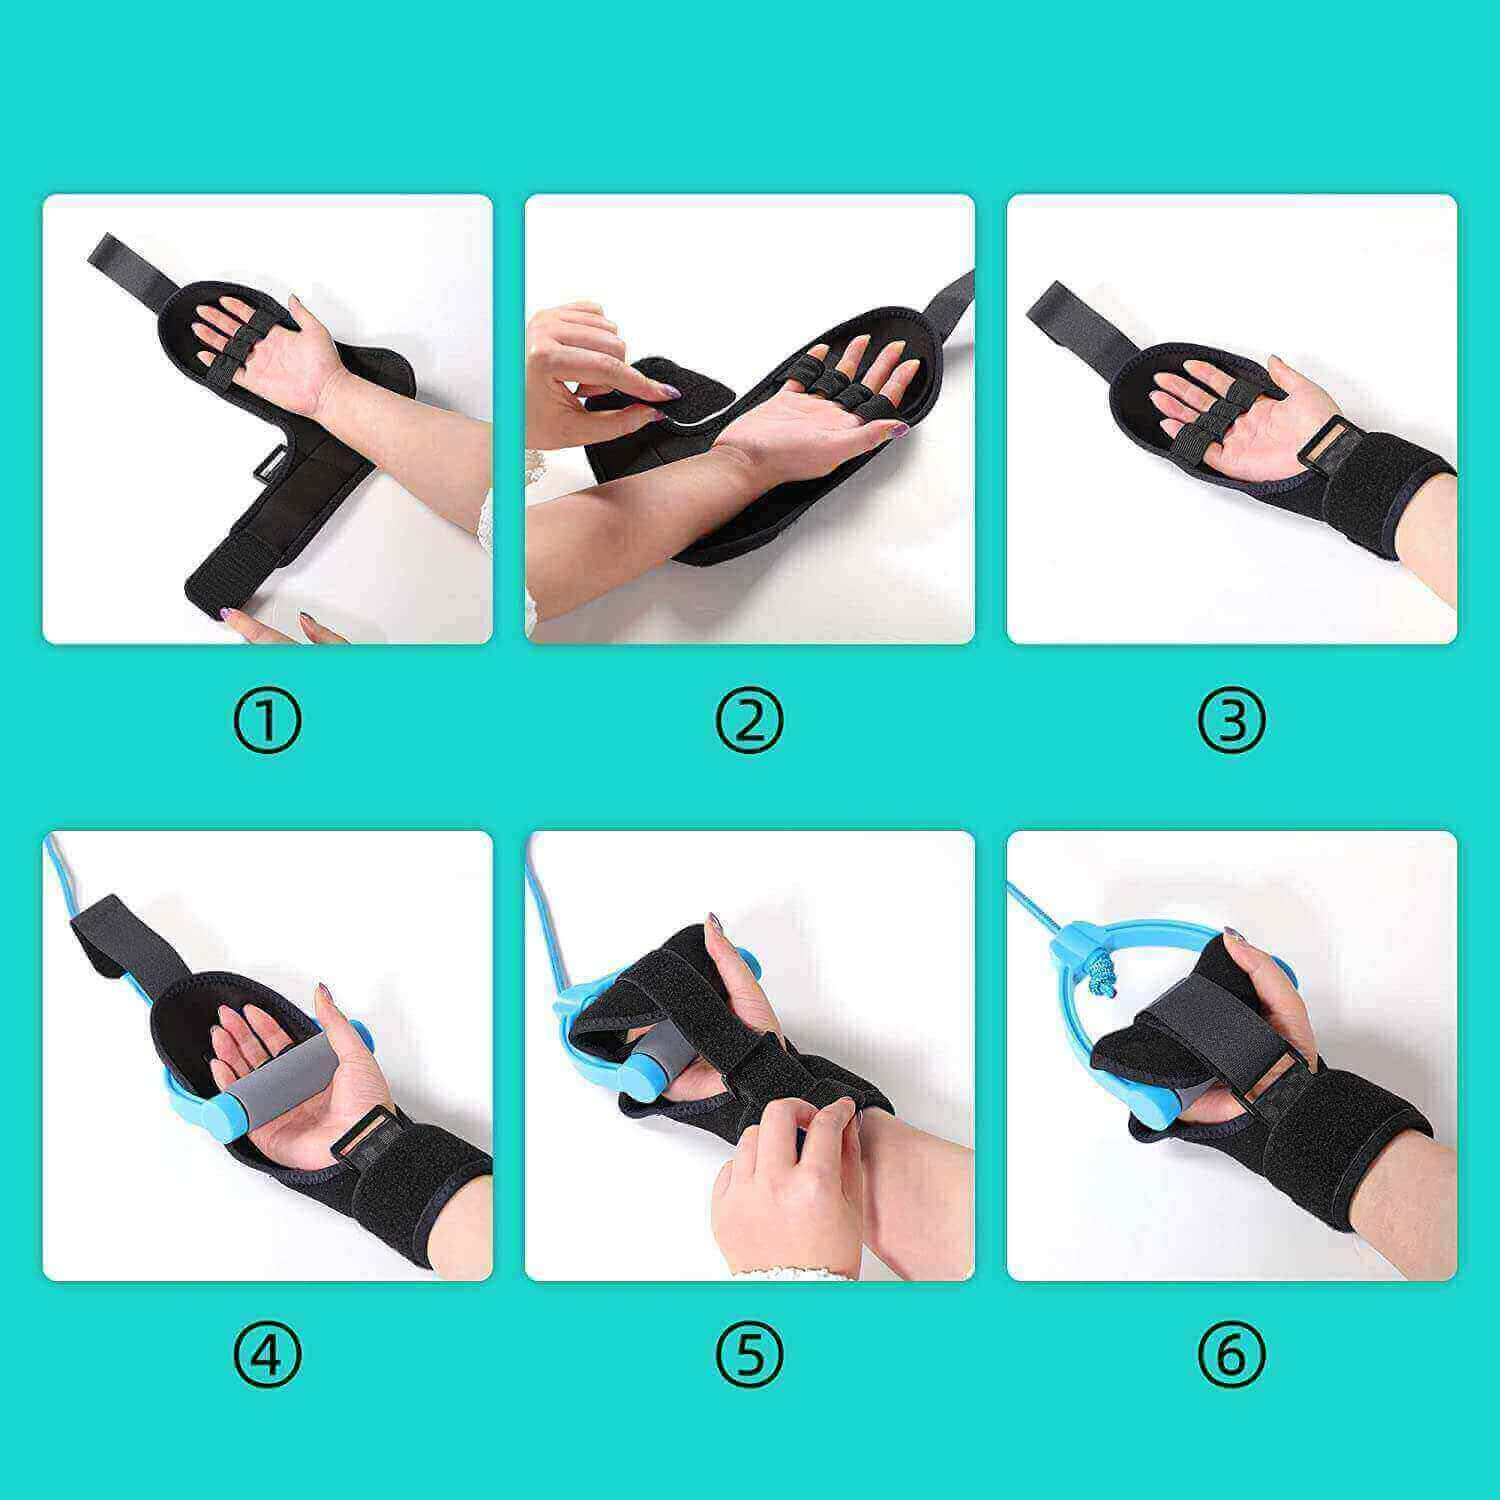 Fanwer Shoulder Pulley for Exercise Therapy, Frozen Shoulder Exercise, the grip using steps